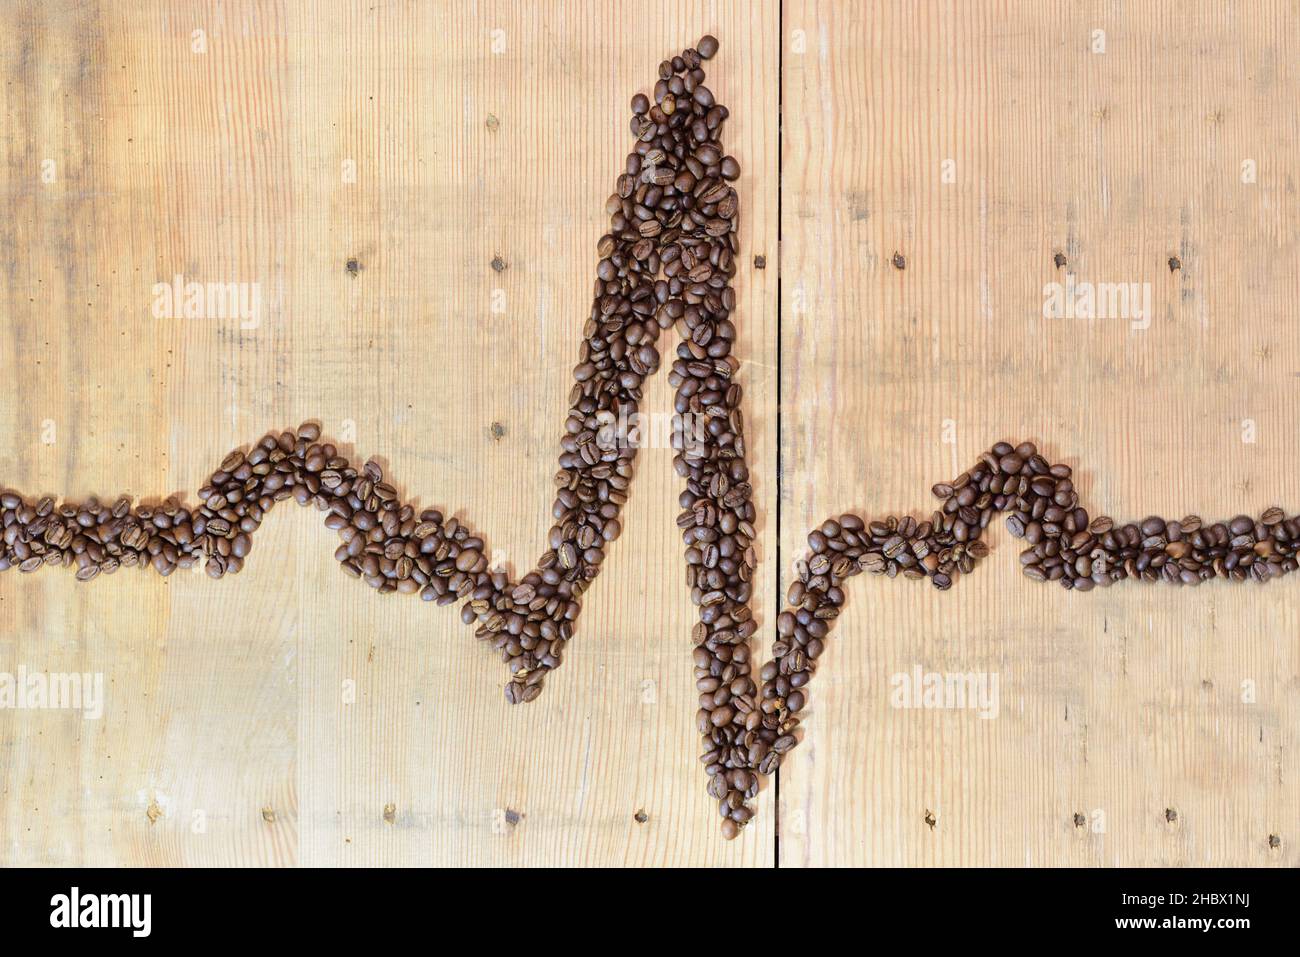 A QRS complex of the electrocardiogram was formed from roasted coffee beans on an old wooden board Stock Photo